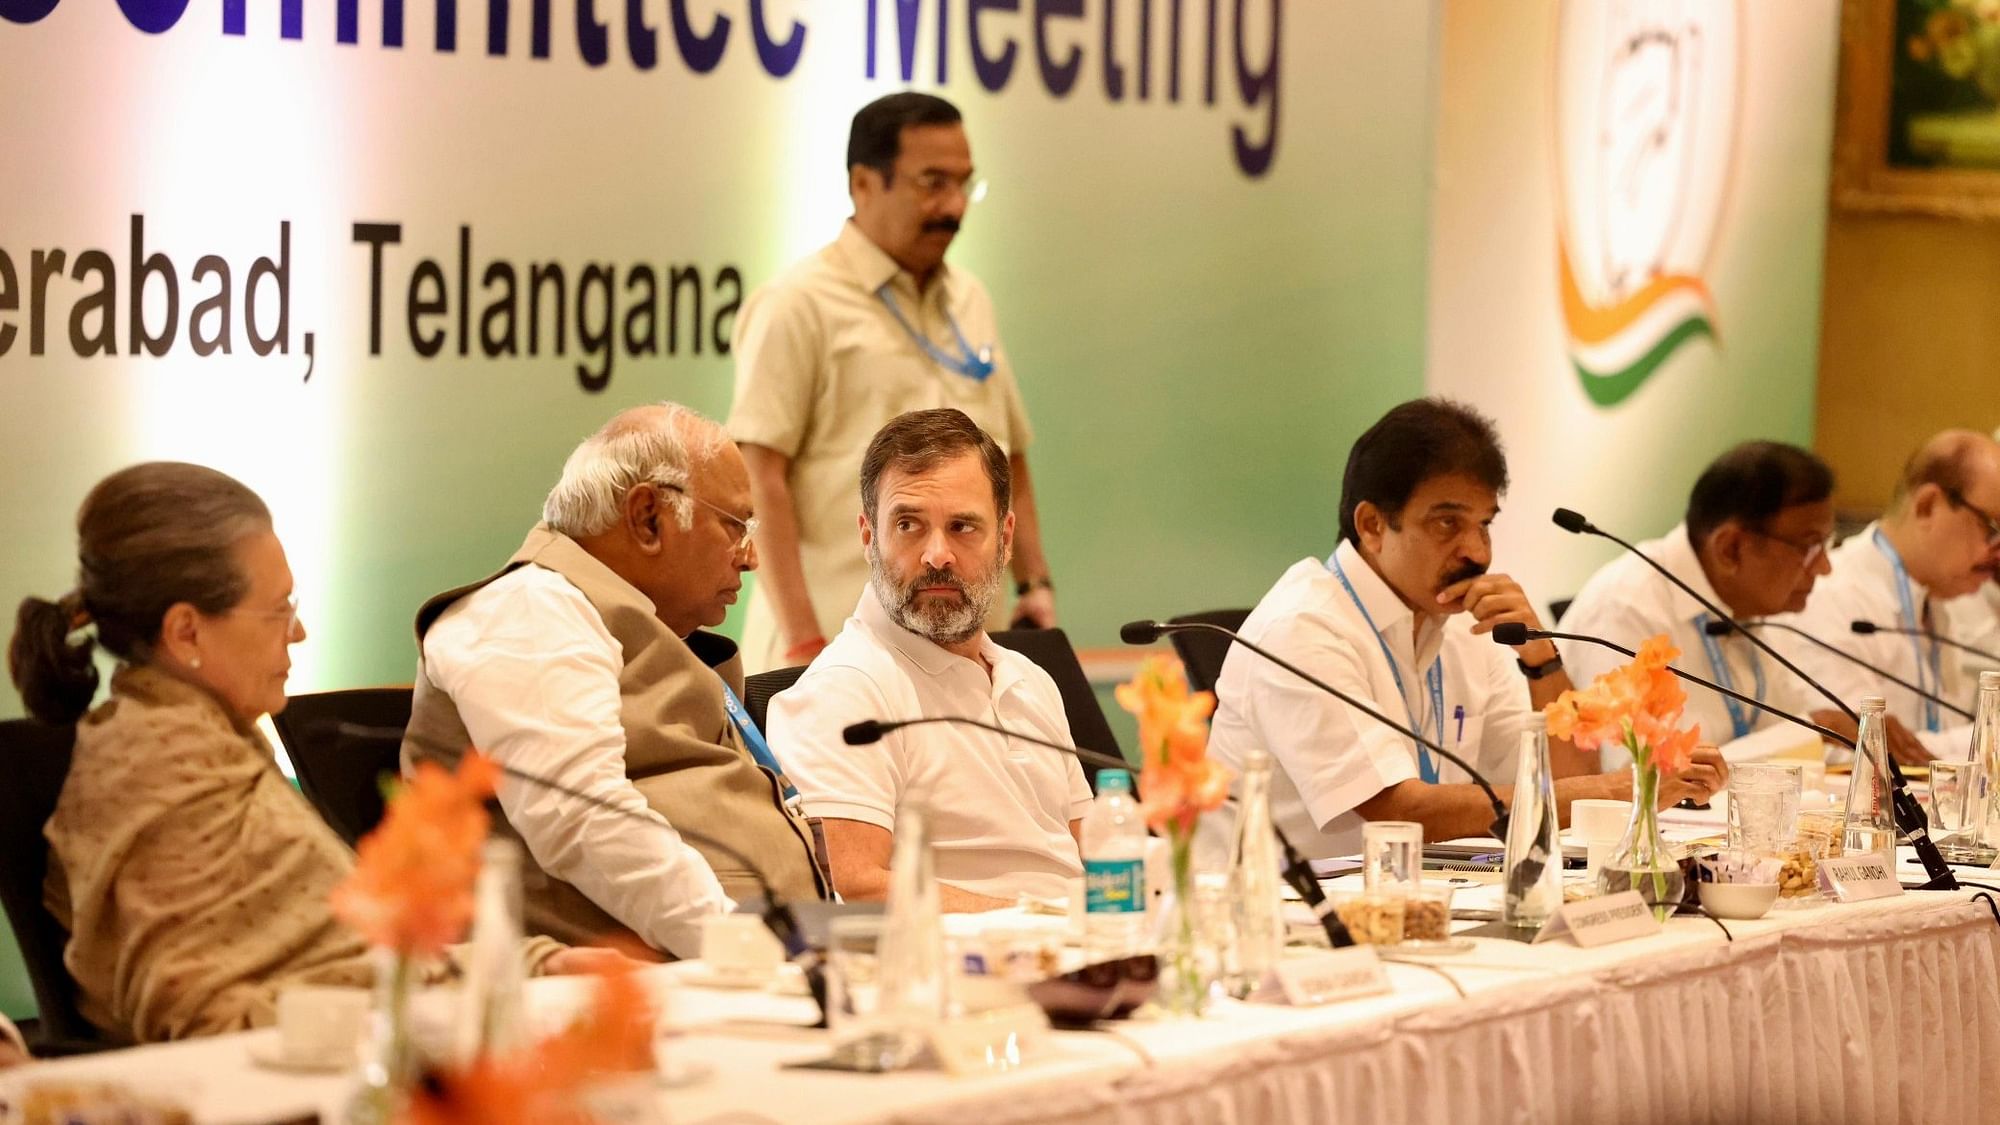 <div class="paragraphs"><p>The Congress Working Committee (CWC), on Day 1 of its two-day meeting in Hyderabad on Saturday, 16 September, called for an increase in the upper limit of reservations for Scheduled Caste (SC), Scheduled Tribe (ST), and Other Backward Classes (OBC) communities in the country.</p></div>